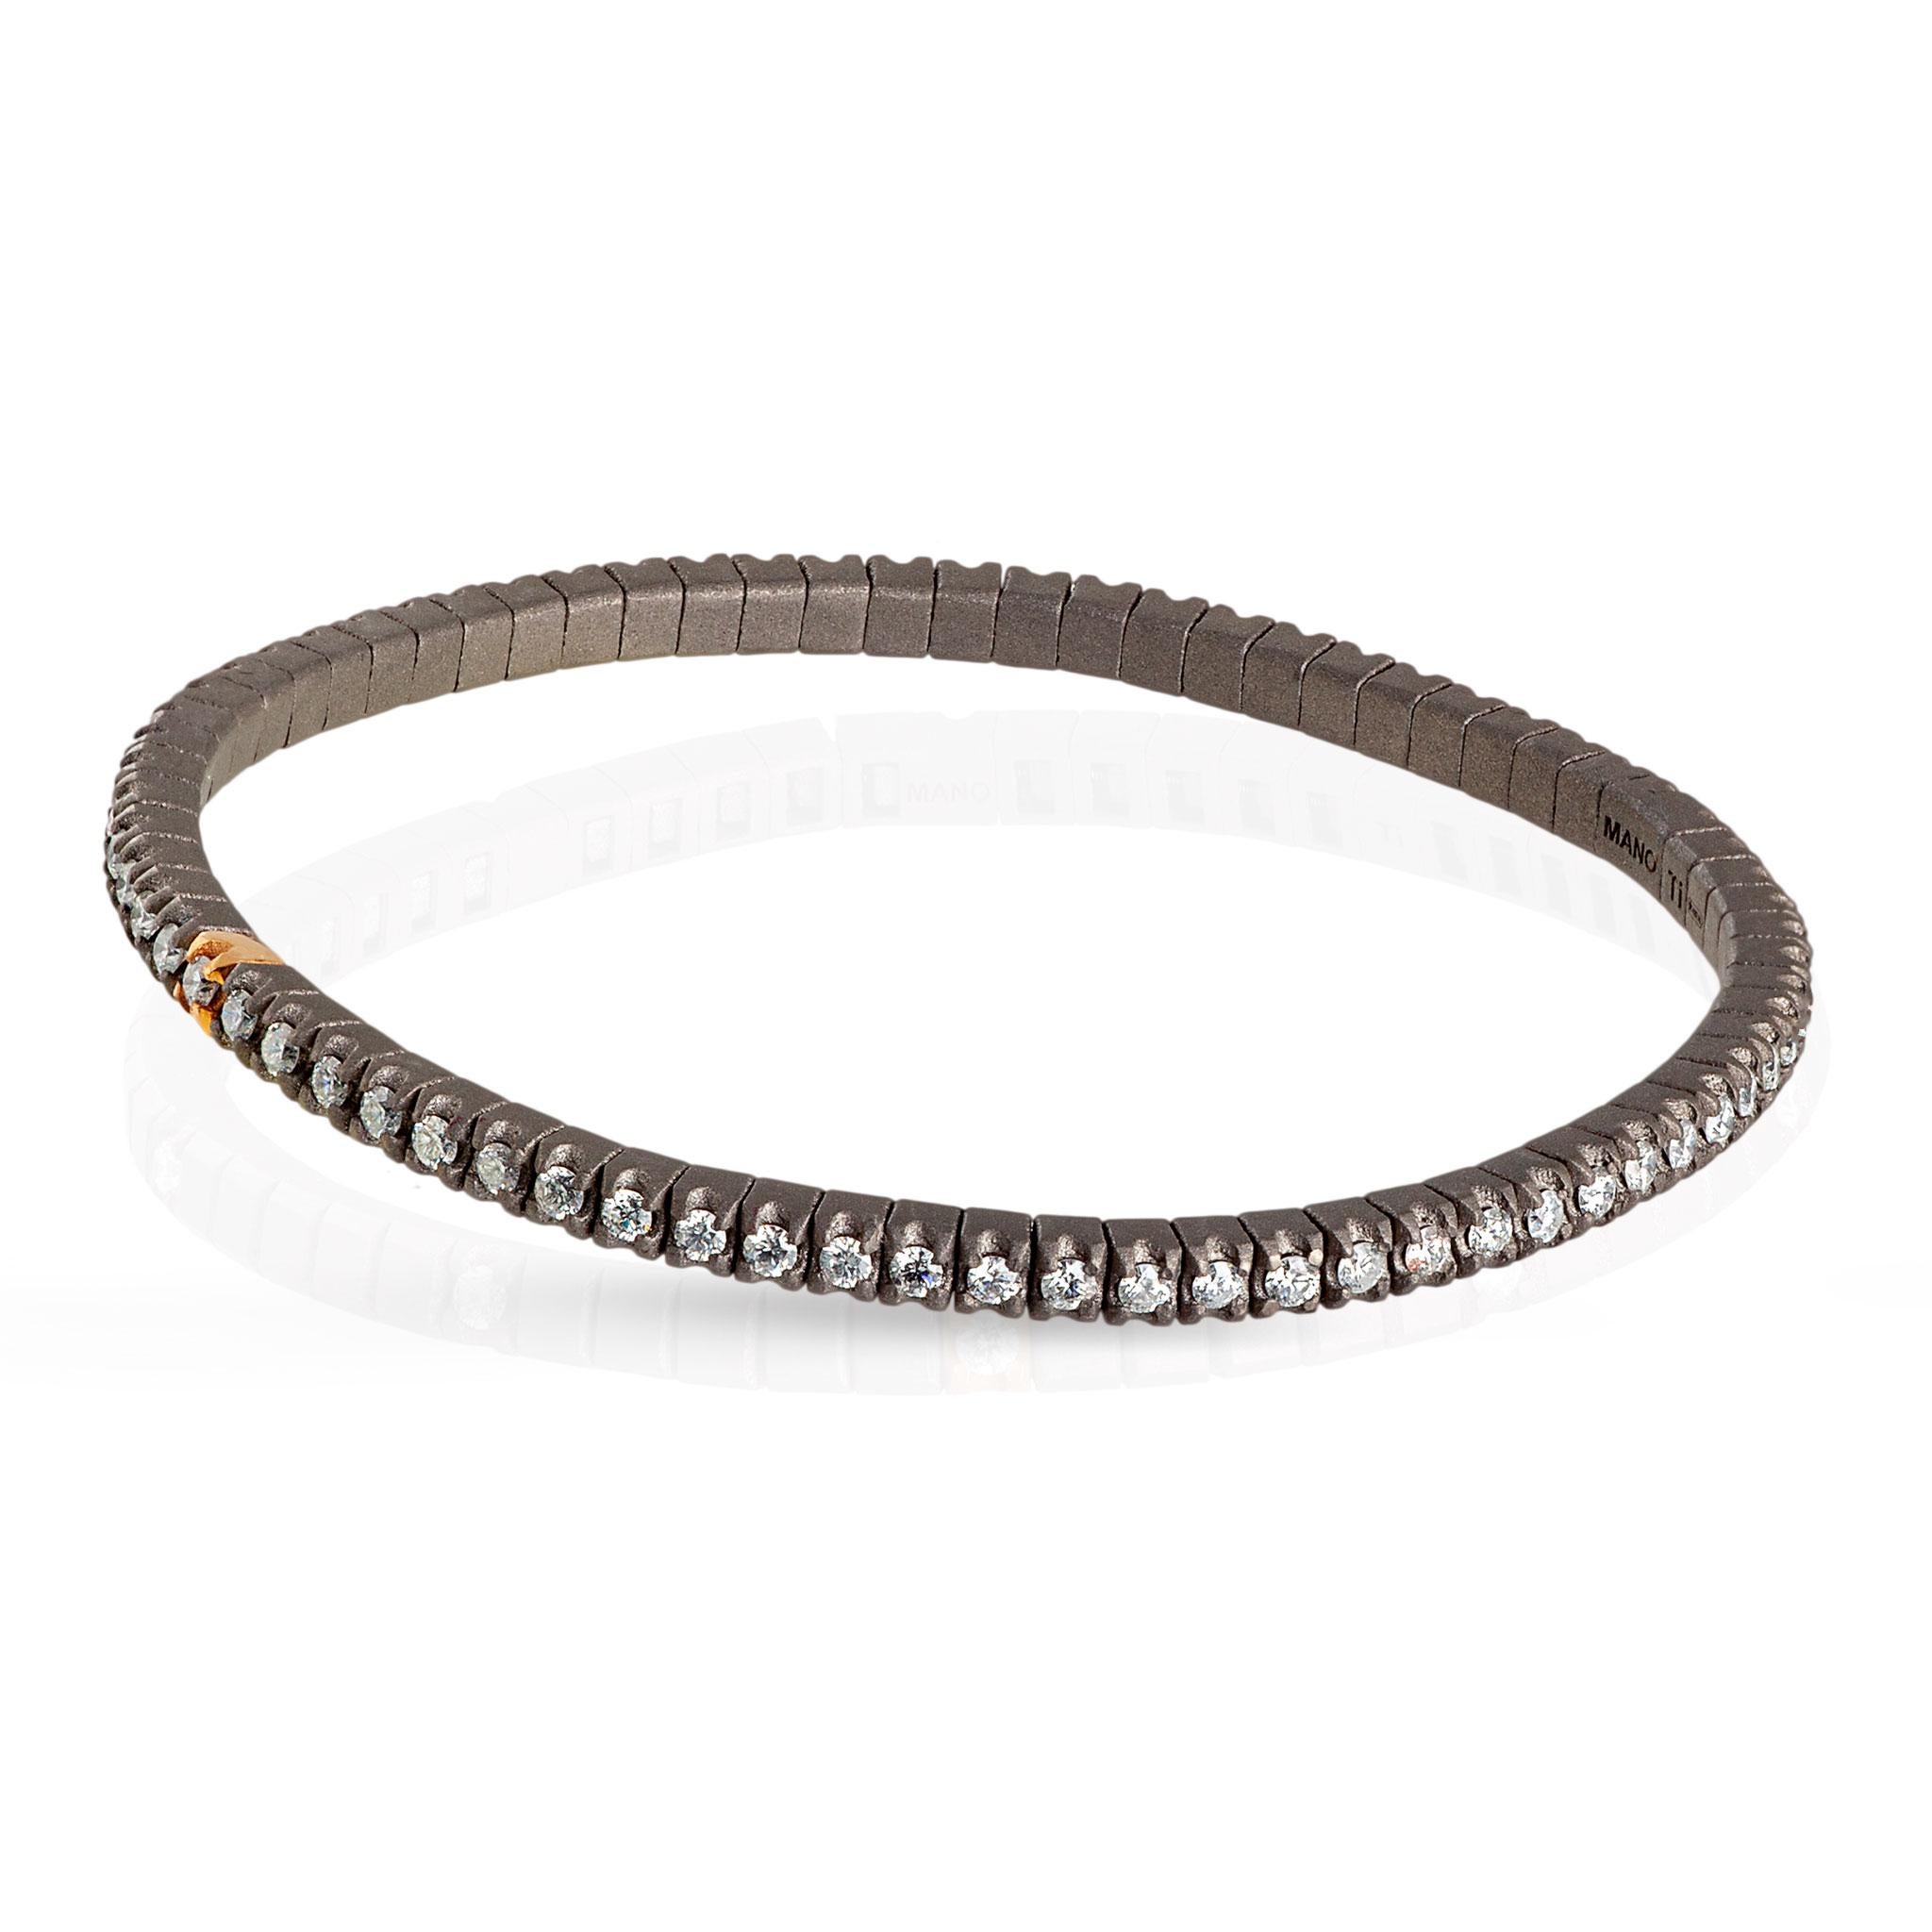 Men's Line Loop bracelet in titanium and white diamonds (ct. 2.15 approx.). The structure consists of an unbroken row of 3-point diamonds set on titanium griffes and one in 18kt red gold placed side by side on an elastic link. This bracelet